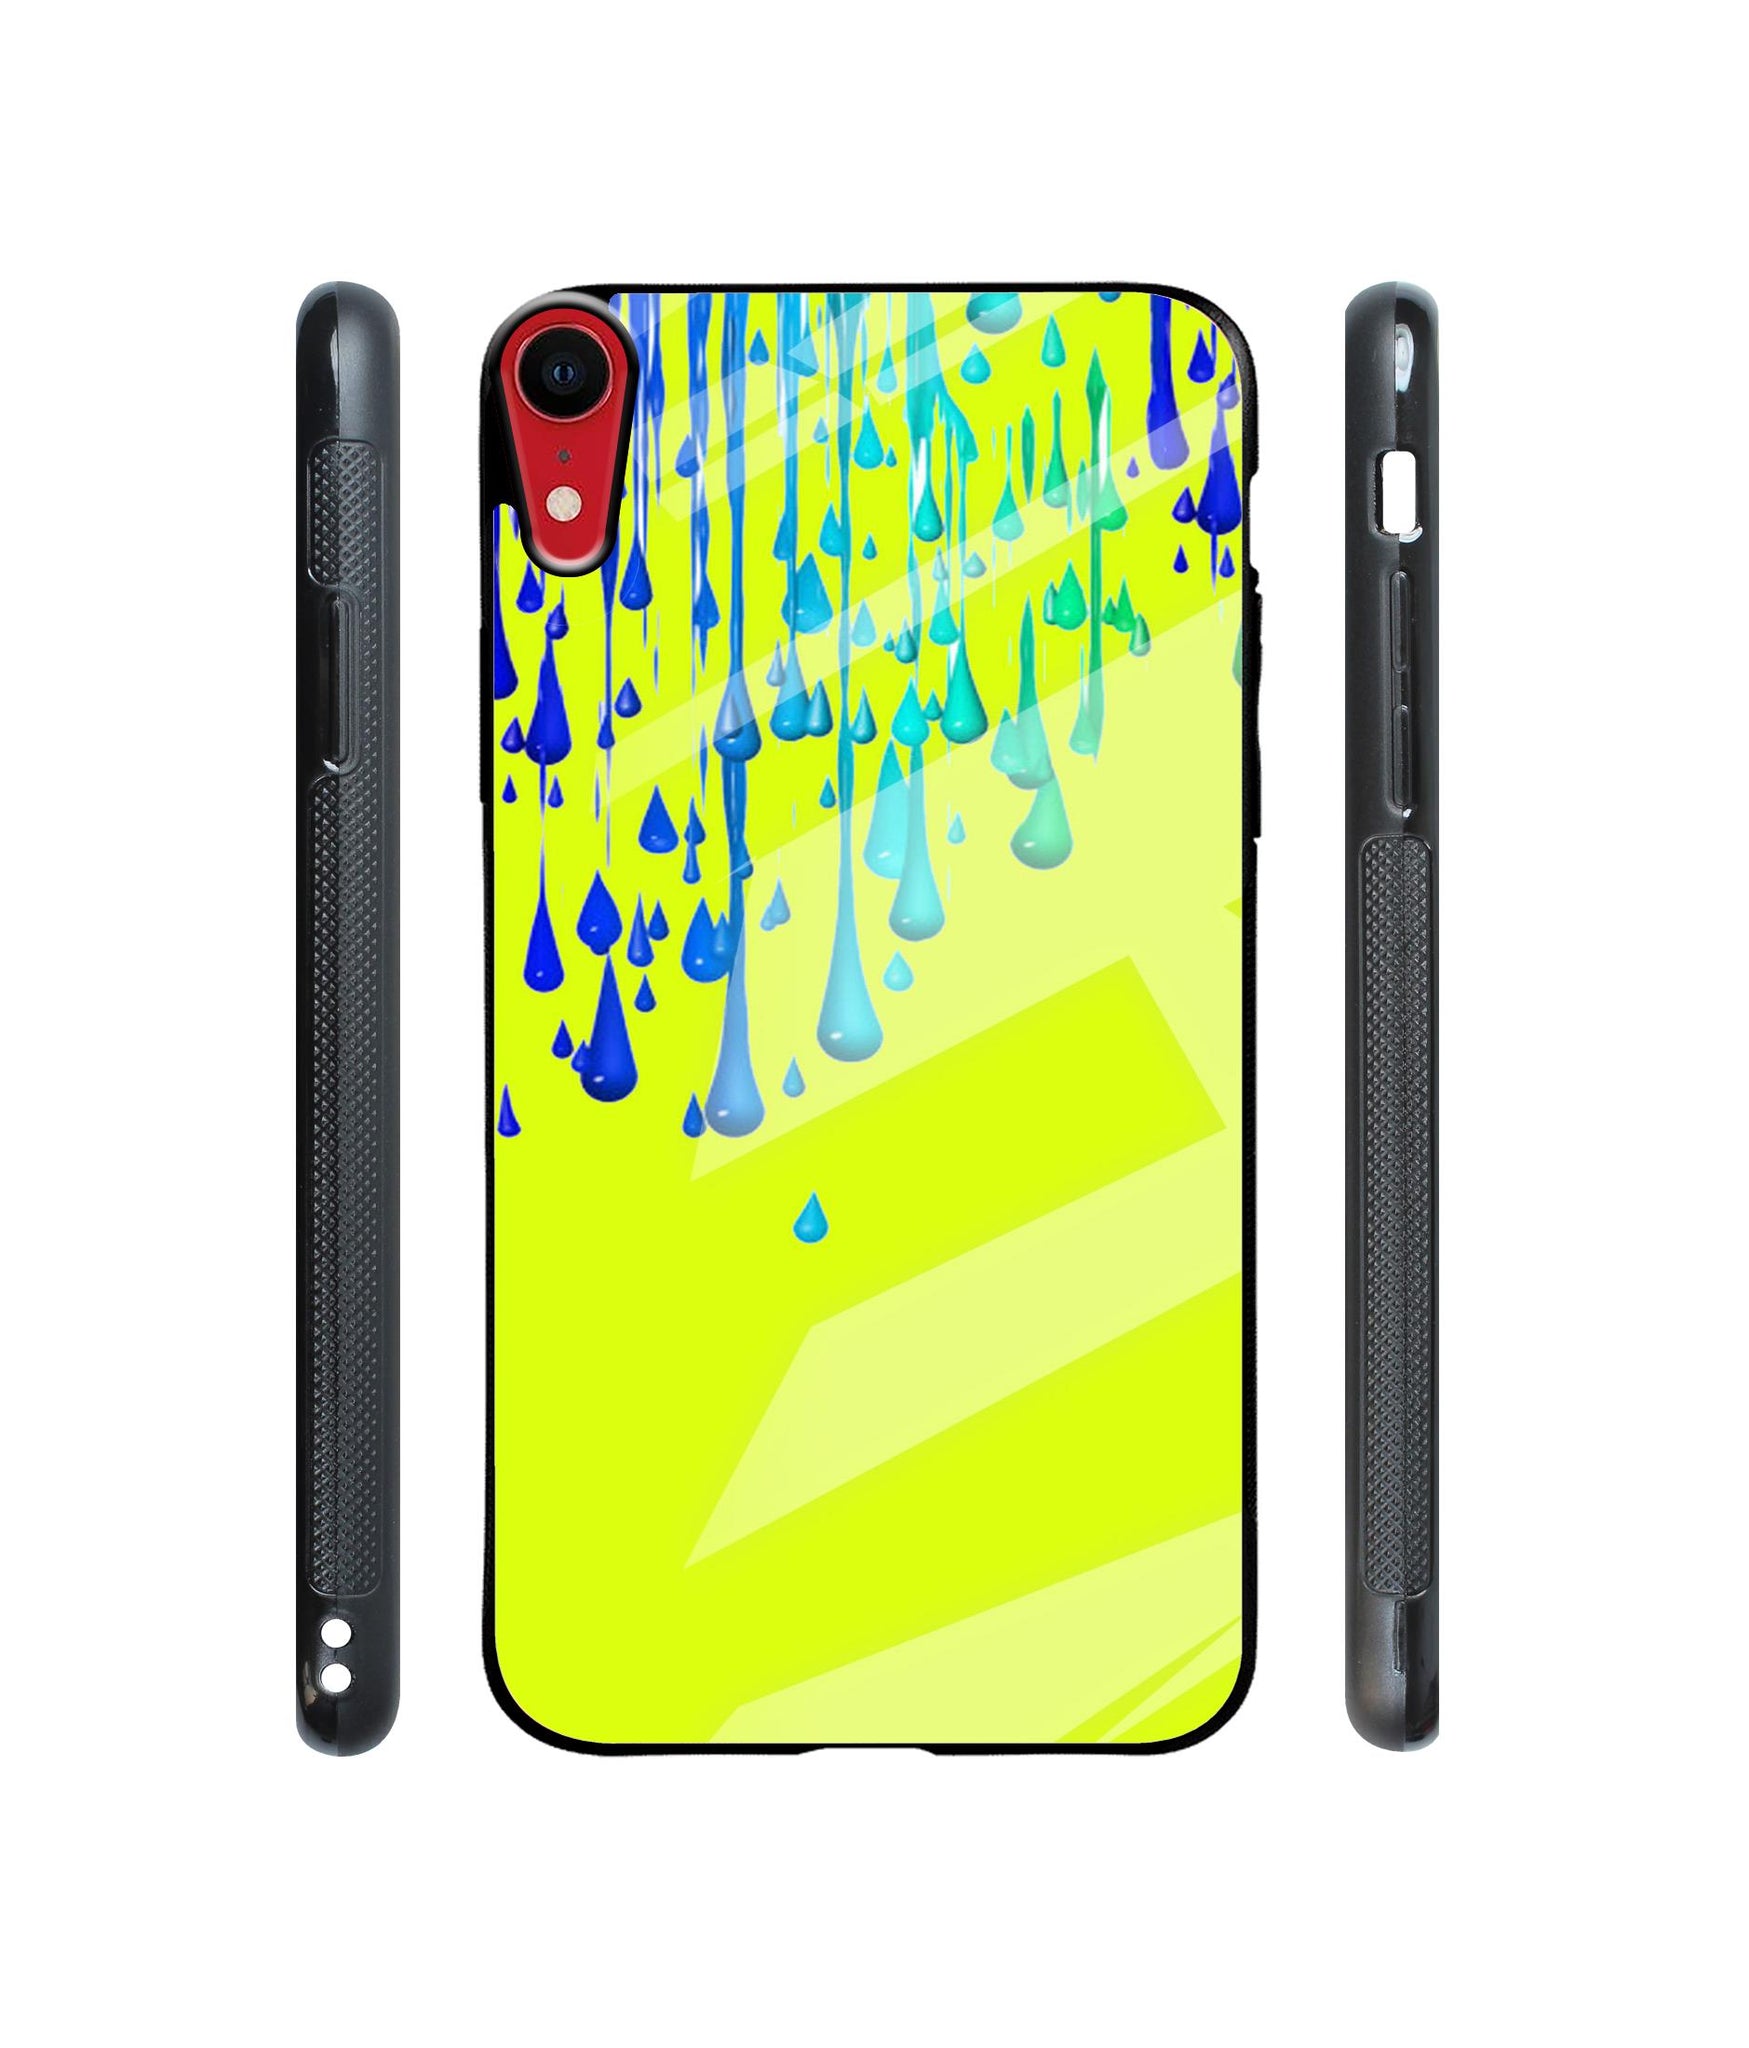 Neon Paint Designer Printed Glass Cover for Apple iPhone XR